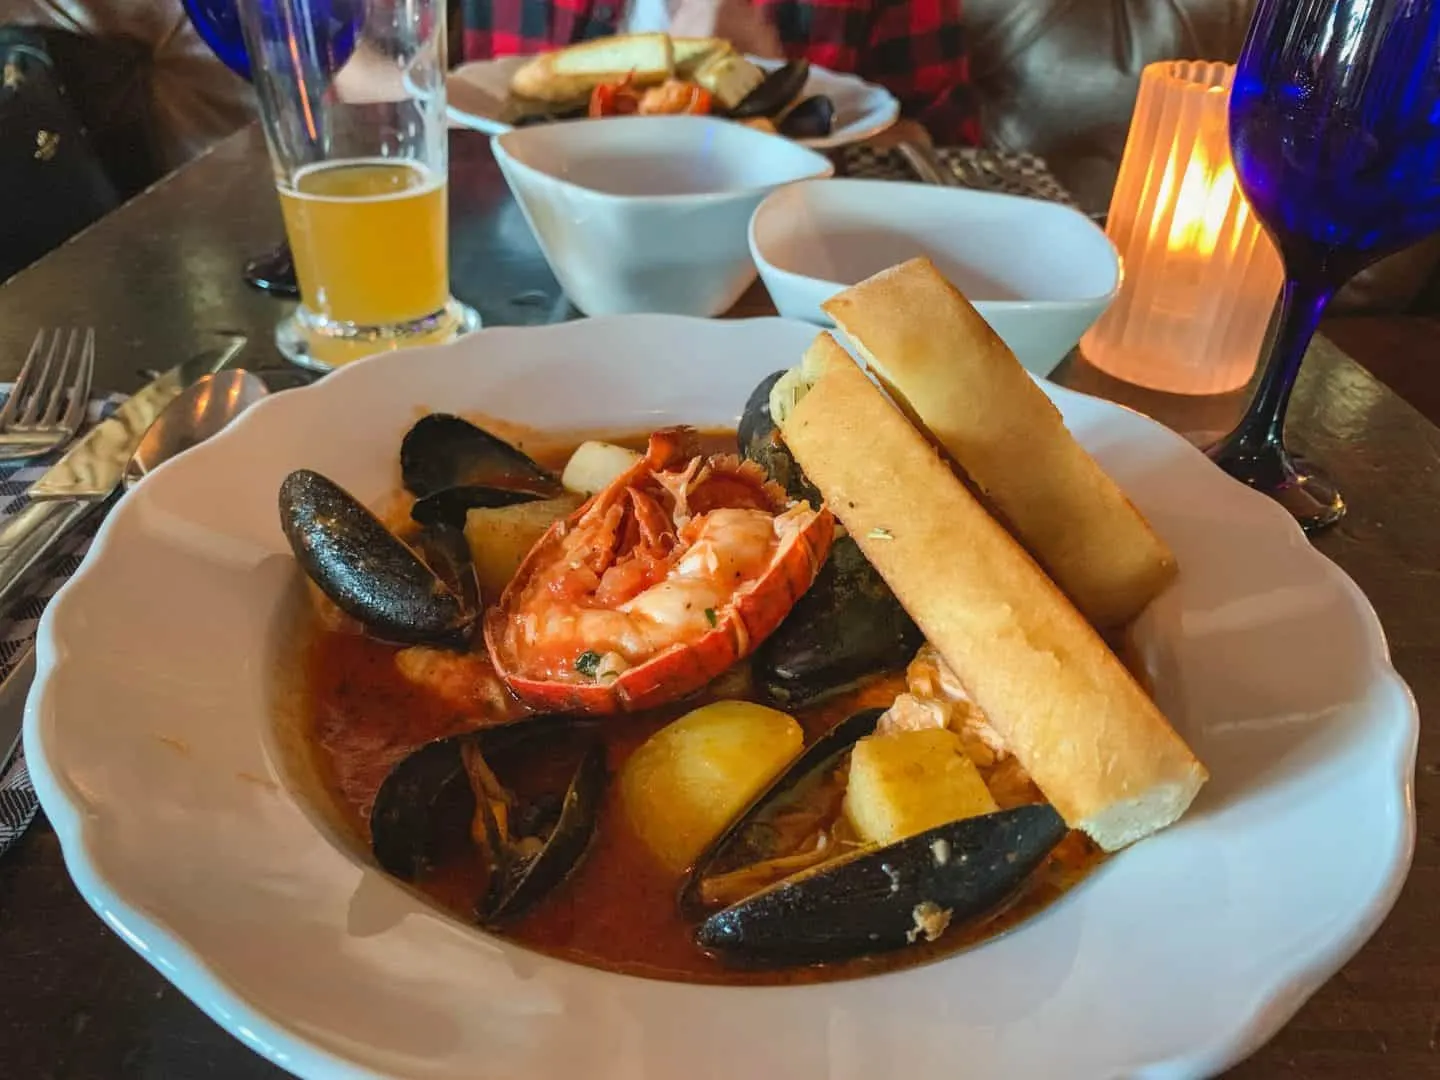 Halifax, Nova Scotia is filled with amazing seafood spots and delicious food. Here are the best places to eat at in Nova Scotia, Canada!